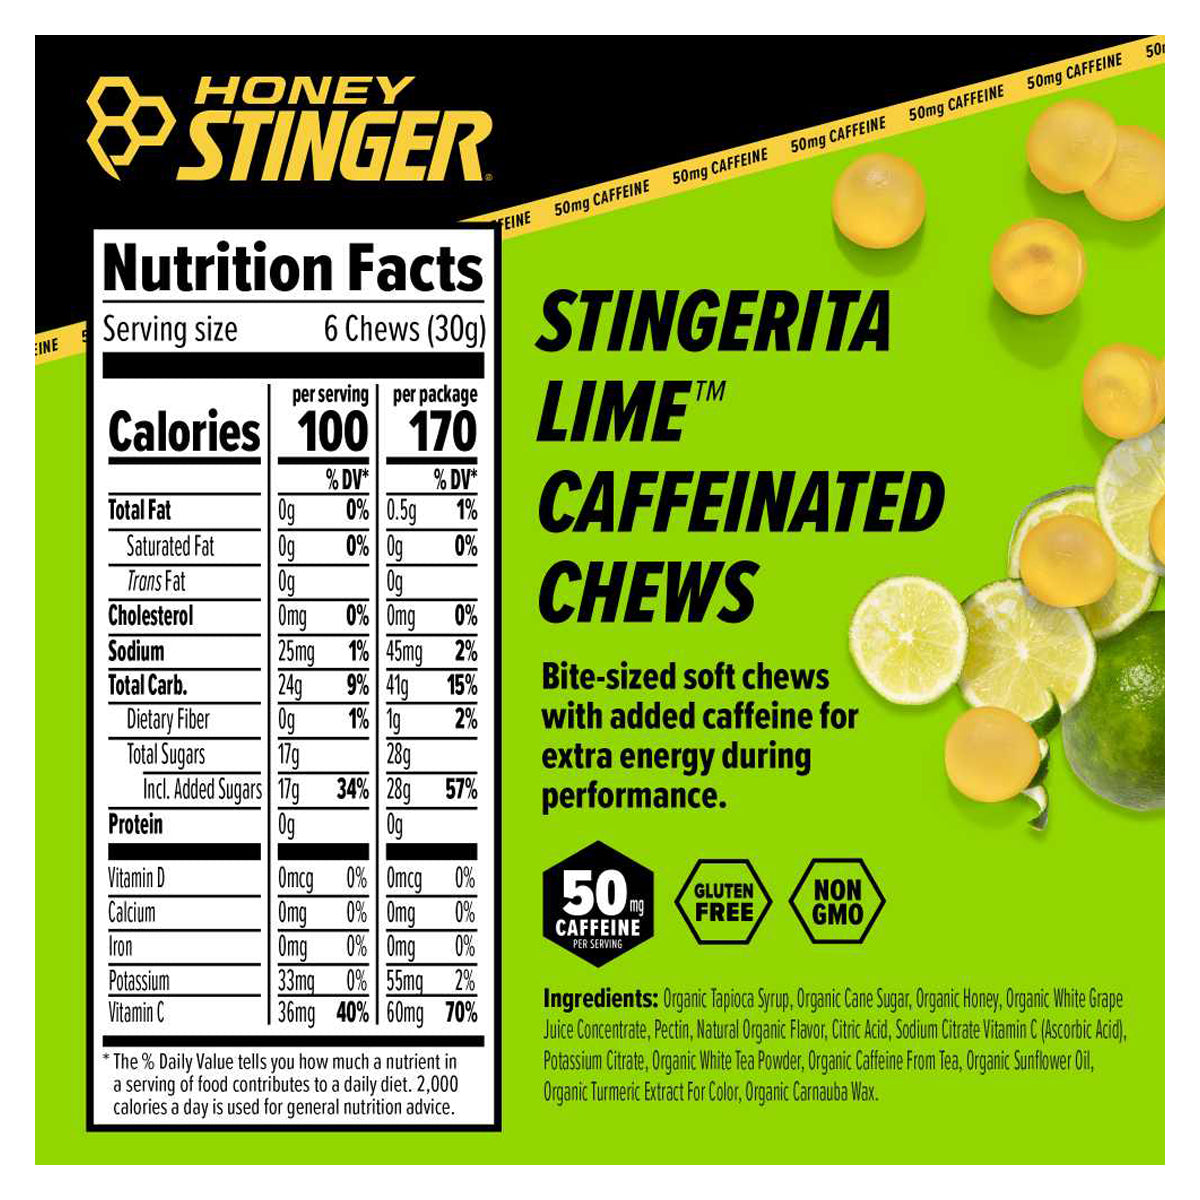 Honey Stinger Caffeinated Energy Chews - 12 Count in  by GOHUNT | Honey Stinger - GOHUNT Shop